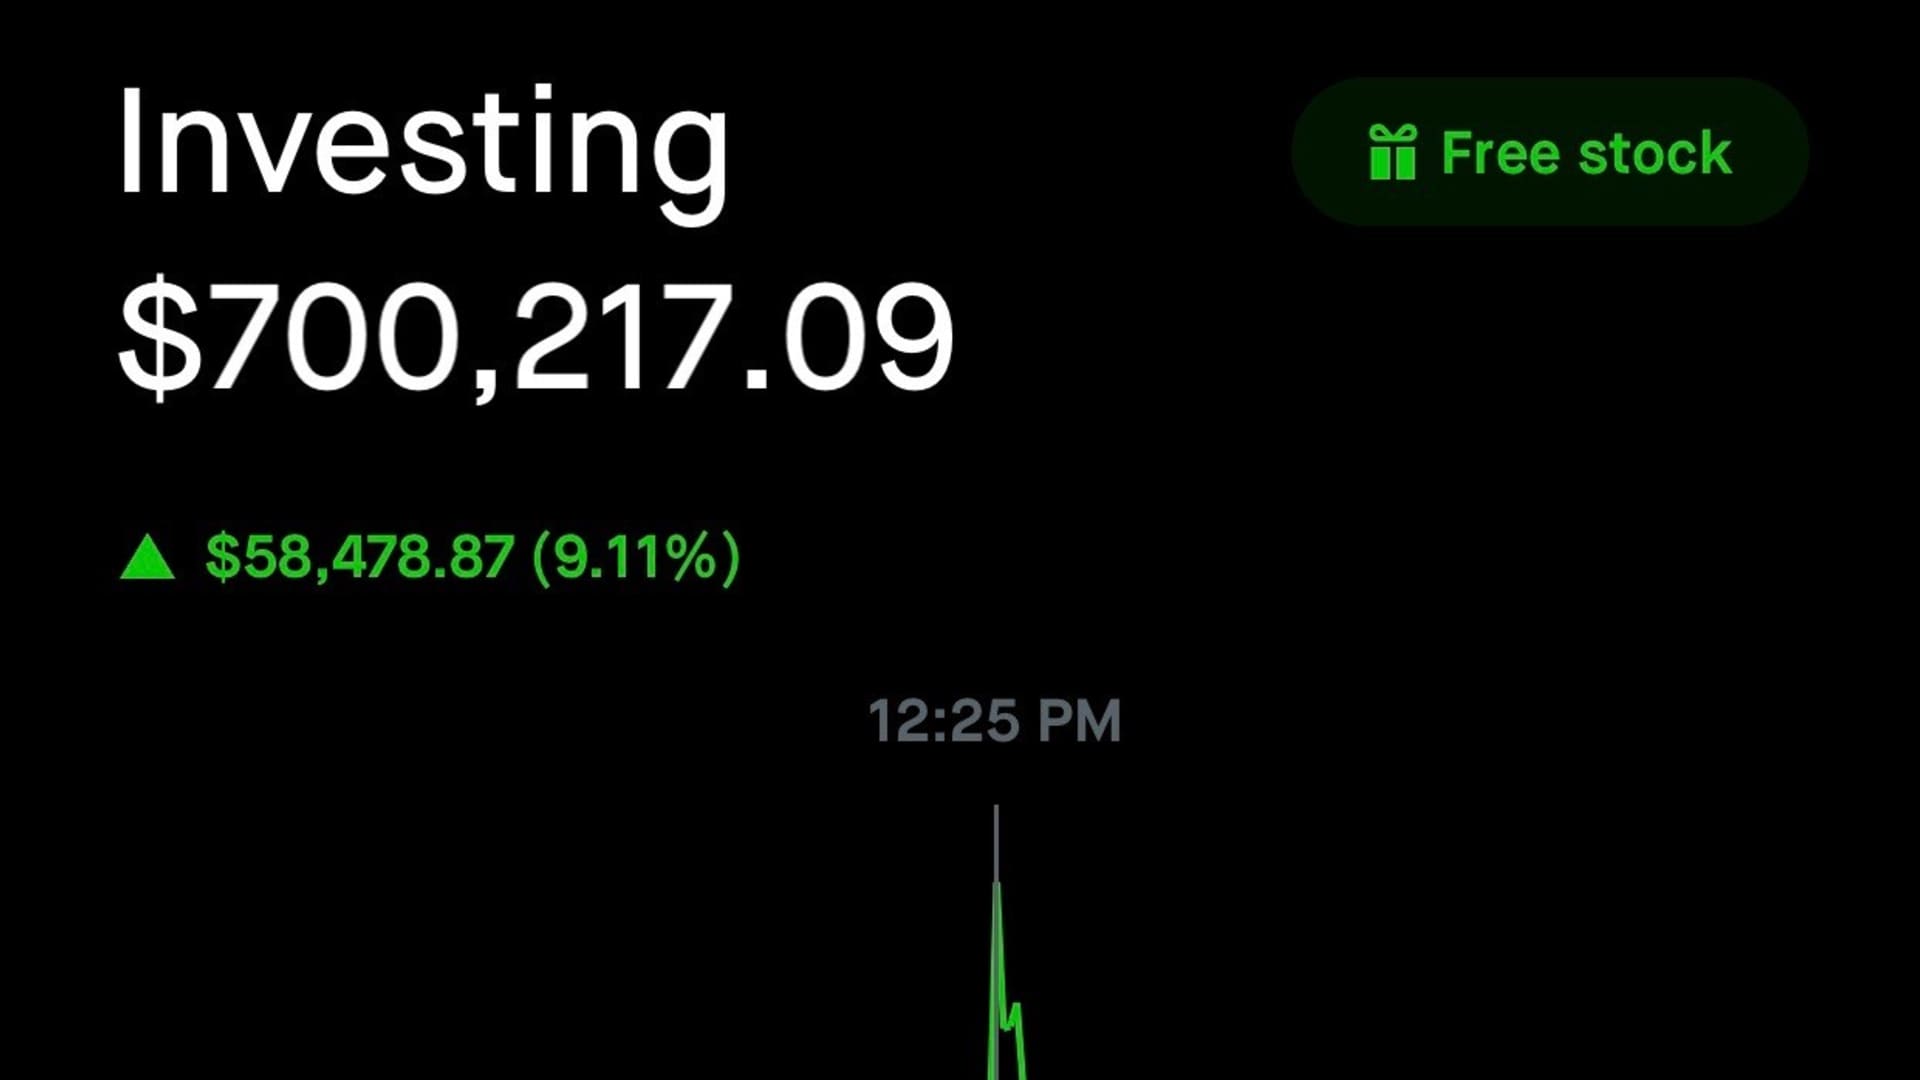 Glauber Contessoto's dogecoin holdings on Robinhood as of July 20 at 2:50 p.m. EST.